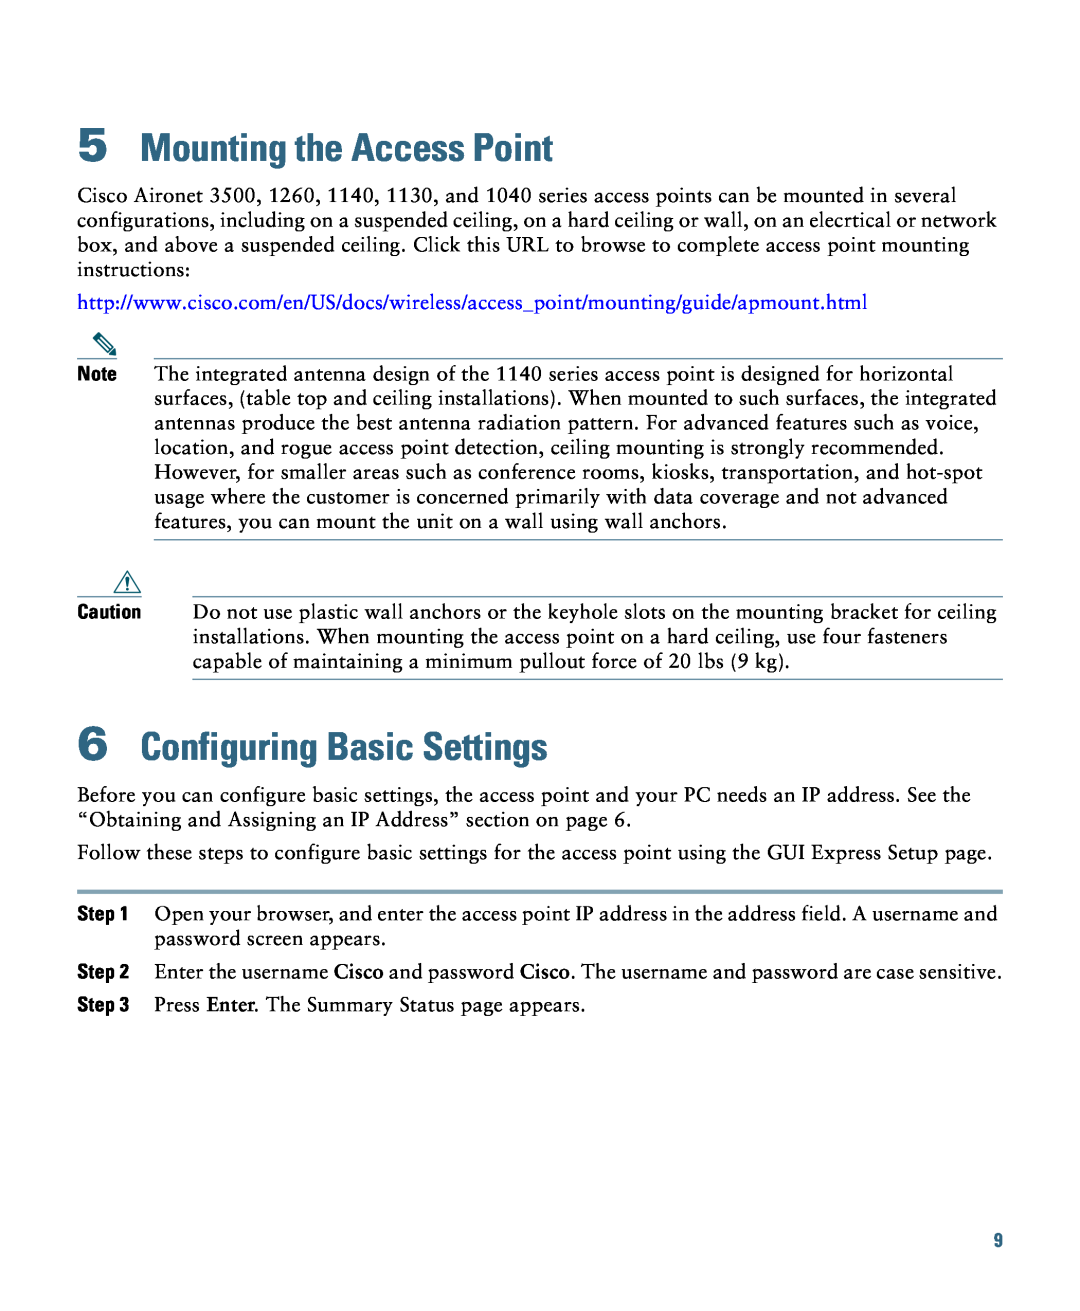 Cisco Systems 1140 specifications Mounting the Access Point, Configuring Basic Settings 